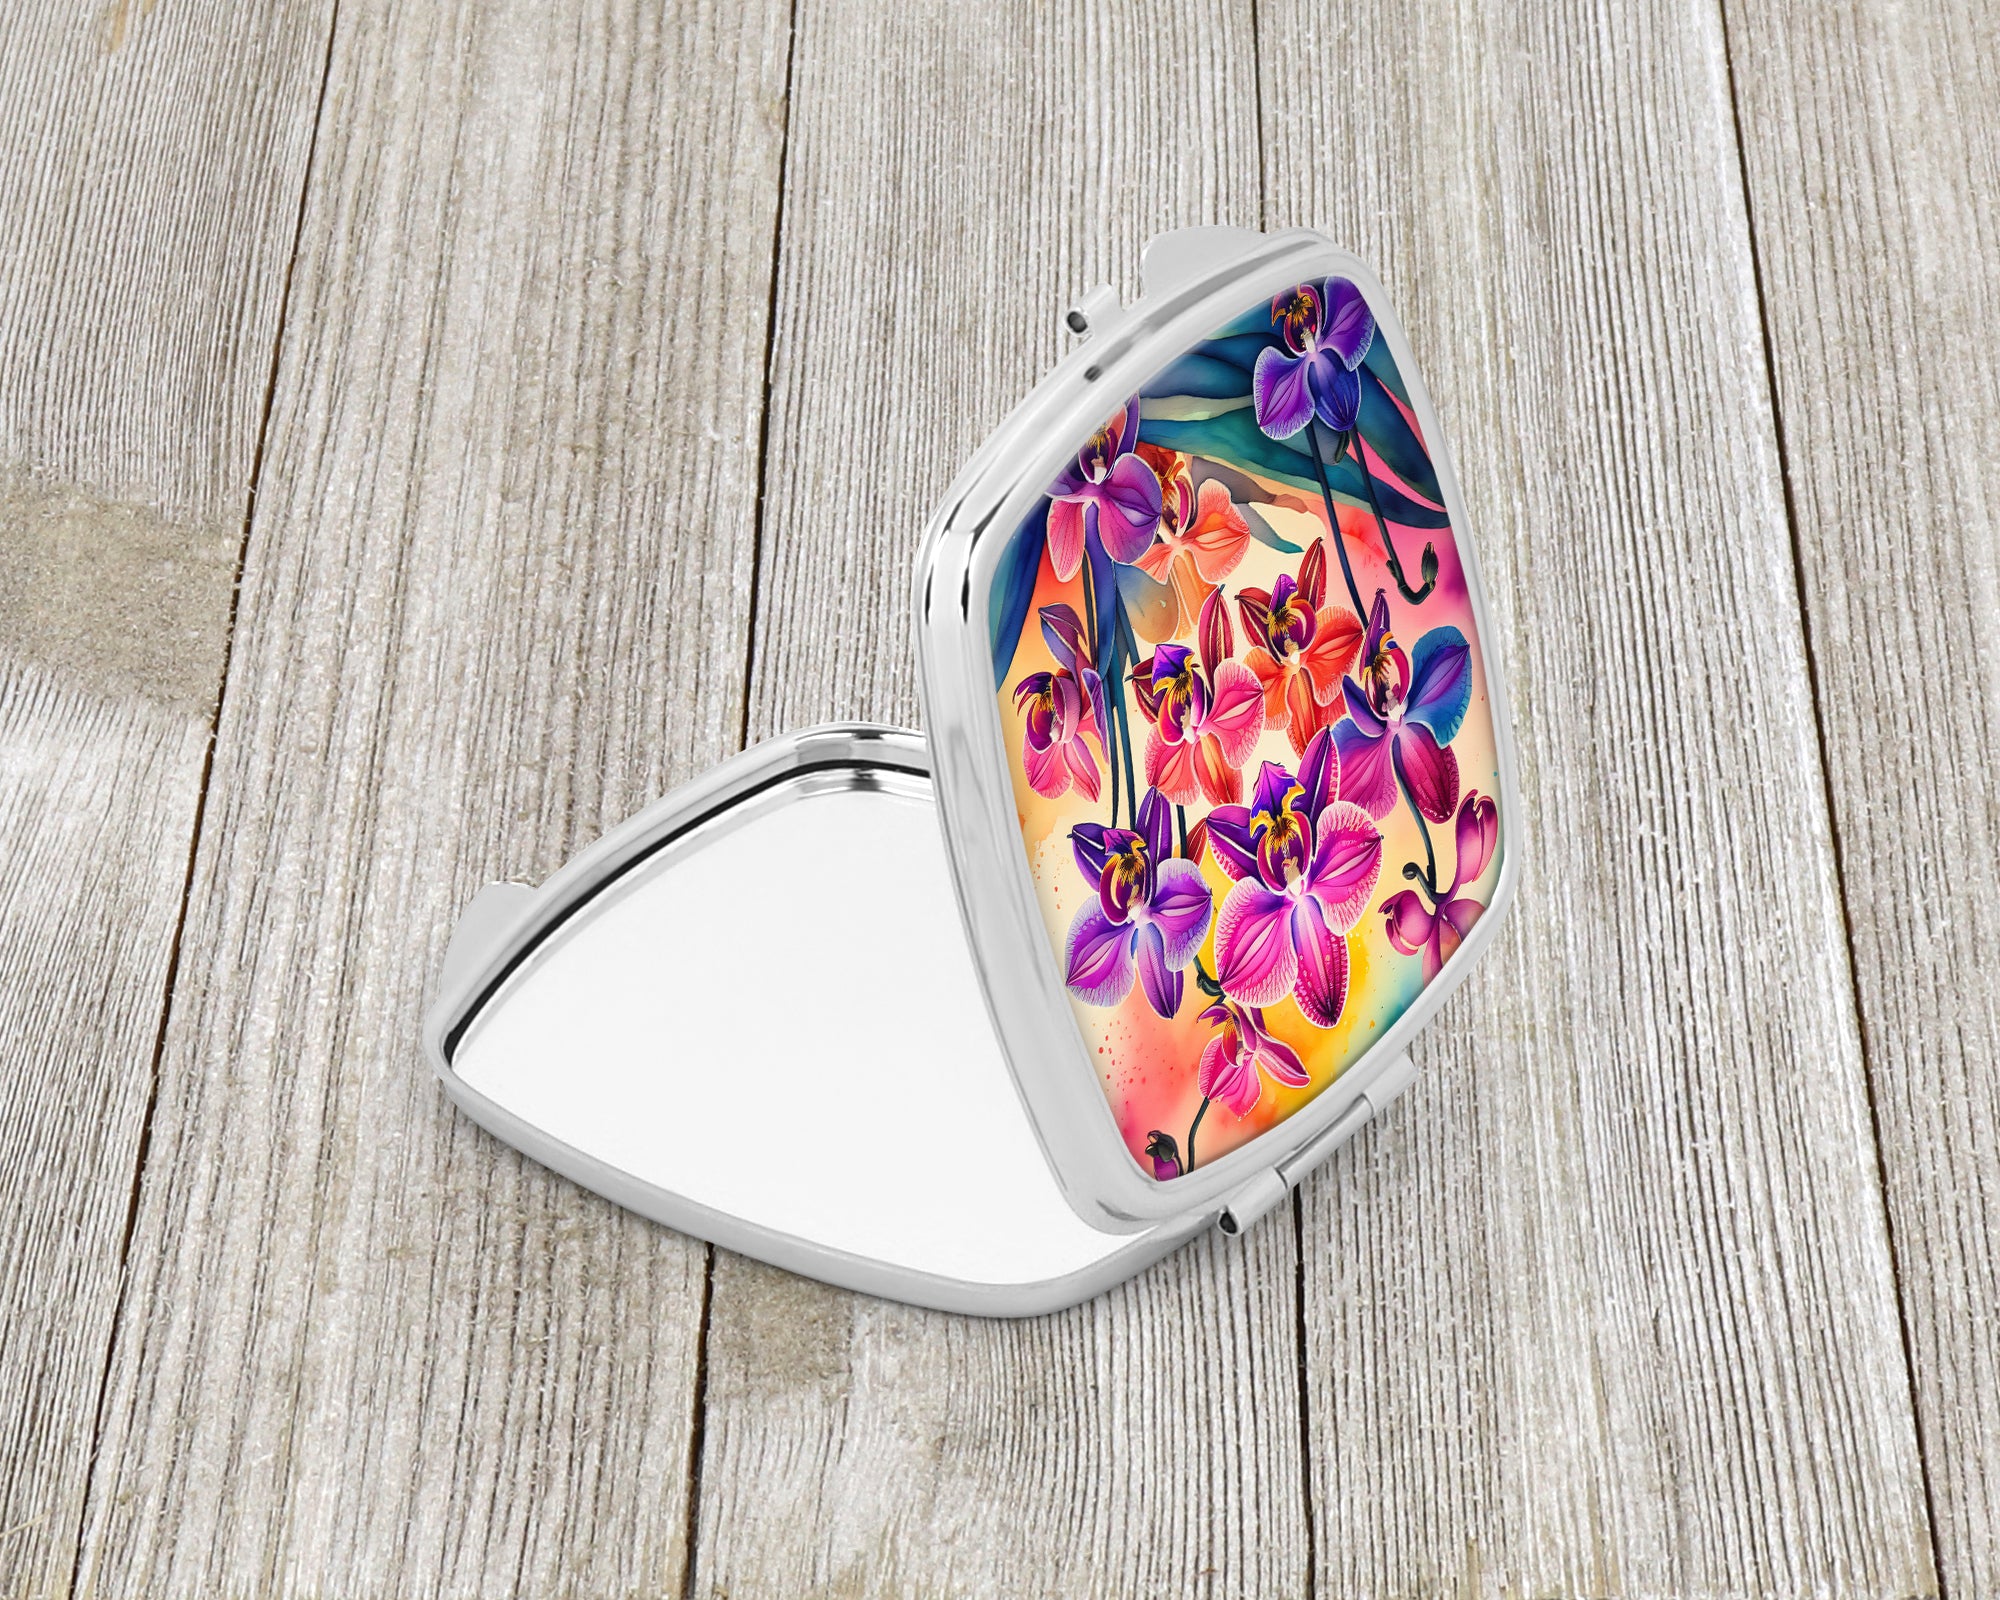 Buy this Colorful Orchids Compact Mirror